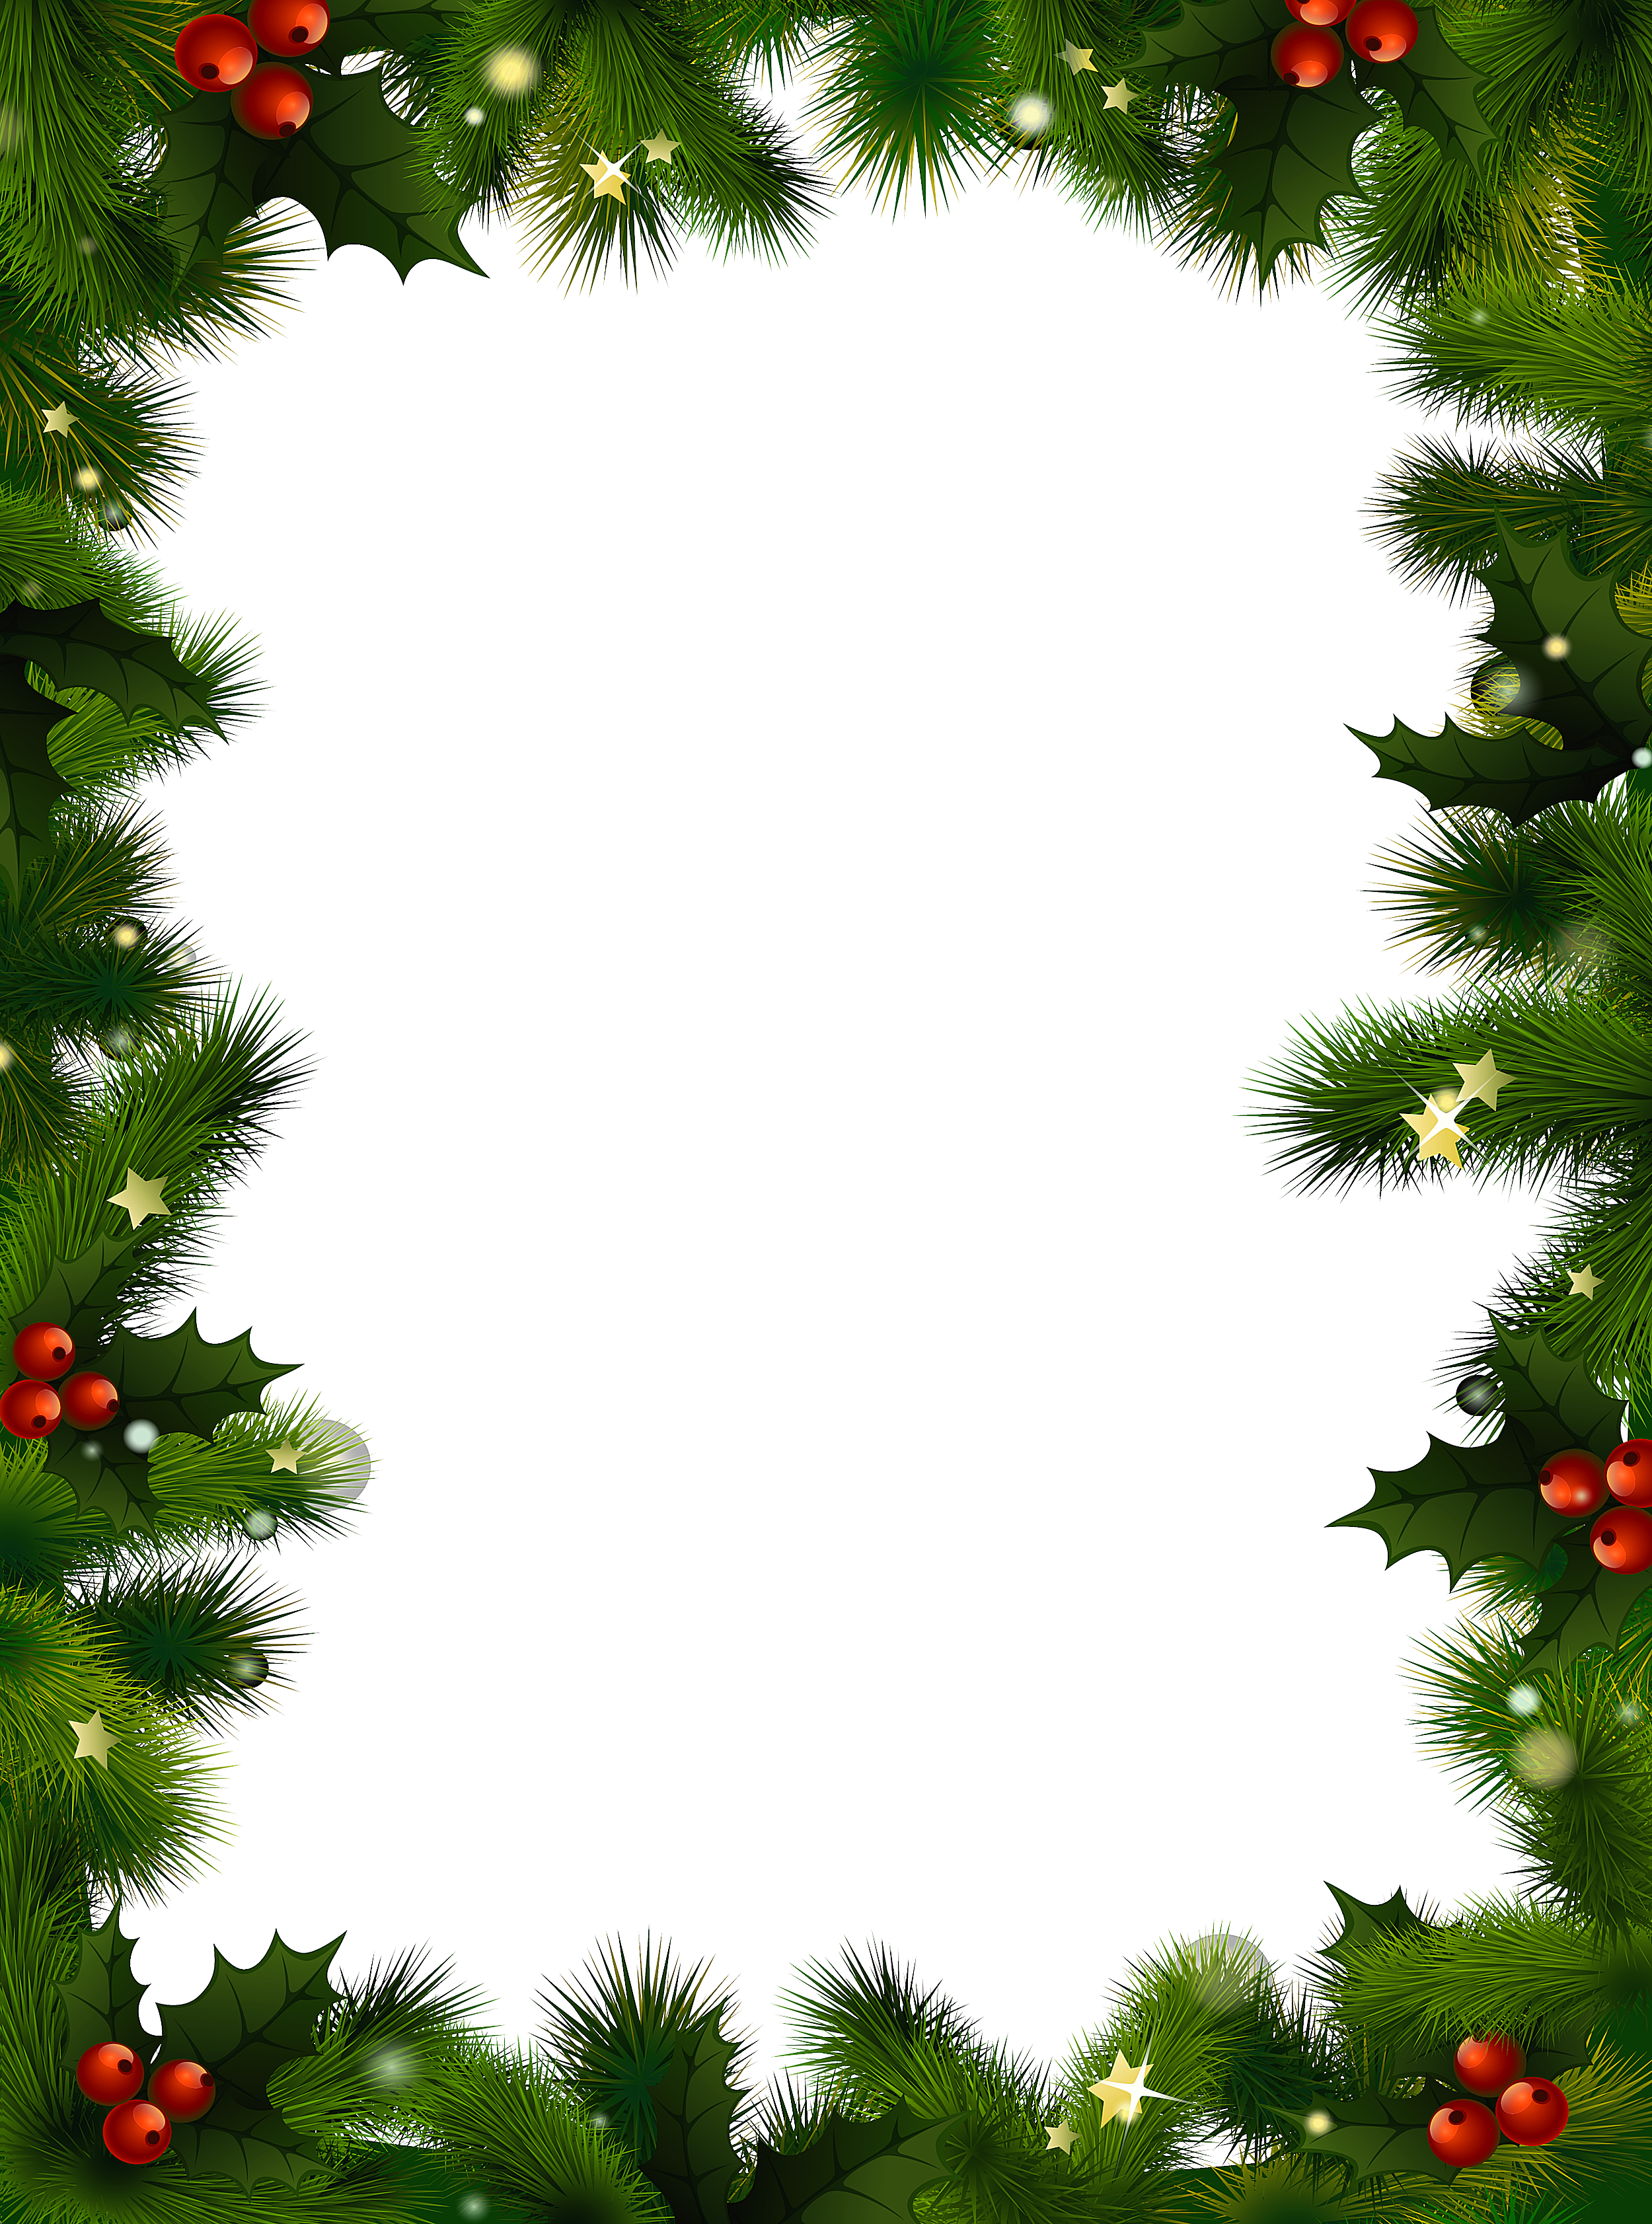 free christmas clipart borders for word - Clipground